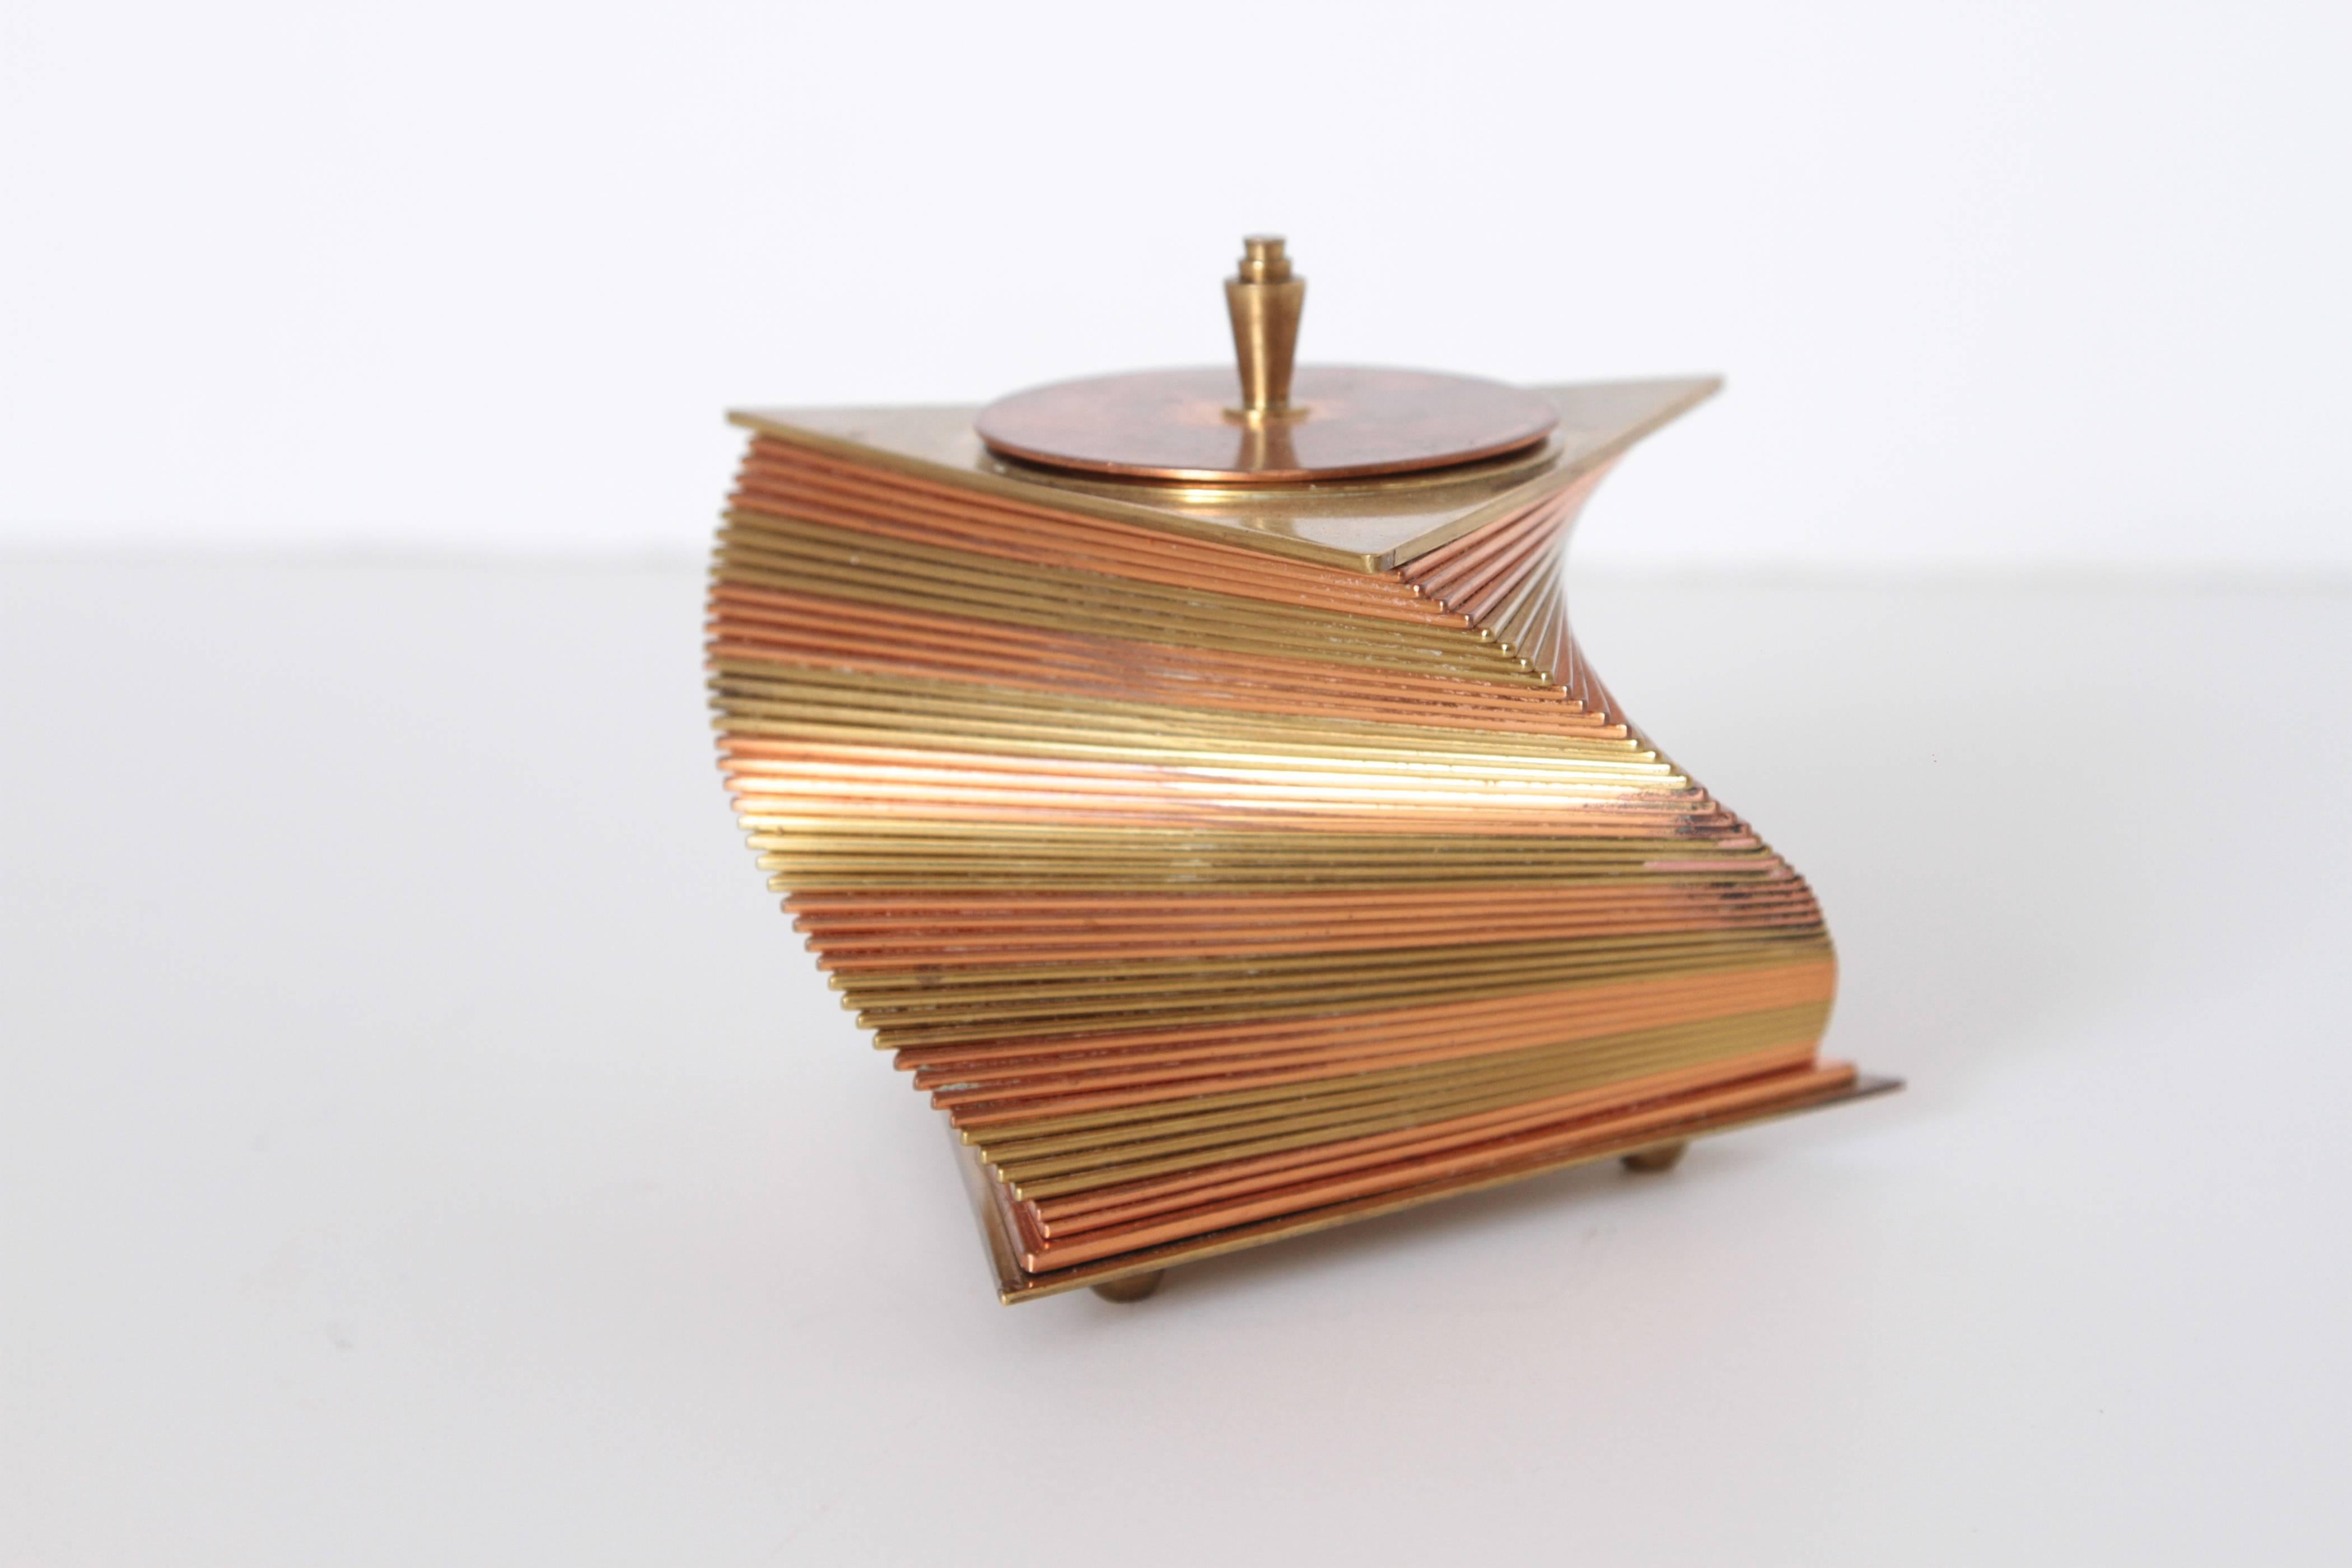 Iconic Machine Age Art Deco John Nicholas Otar Stacked Modernist Cigarette Box  Mixed Metal  Price Reduced

Stamped under lid:  OTAR USA, PATS. PEND.
Retains Original machined finial and feet.  Sometimes missing or replaced.

Patented original John